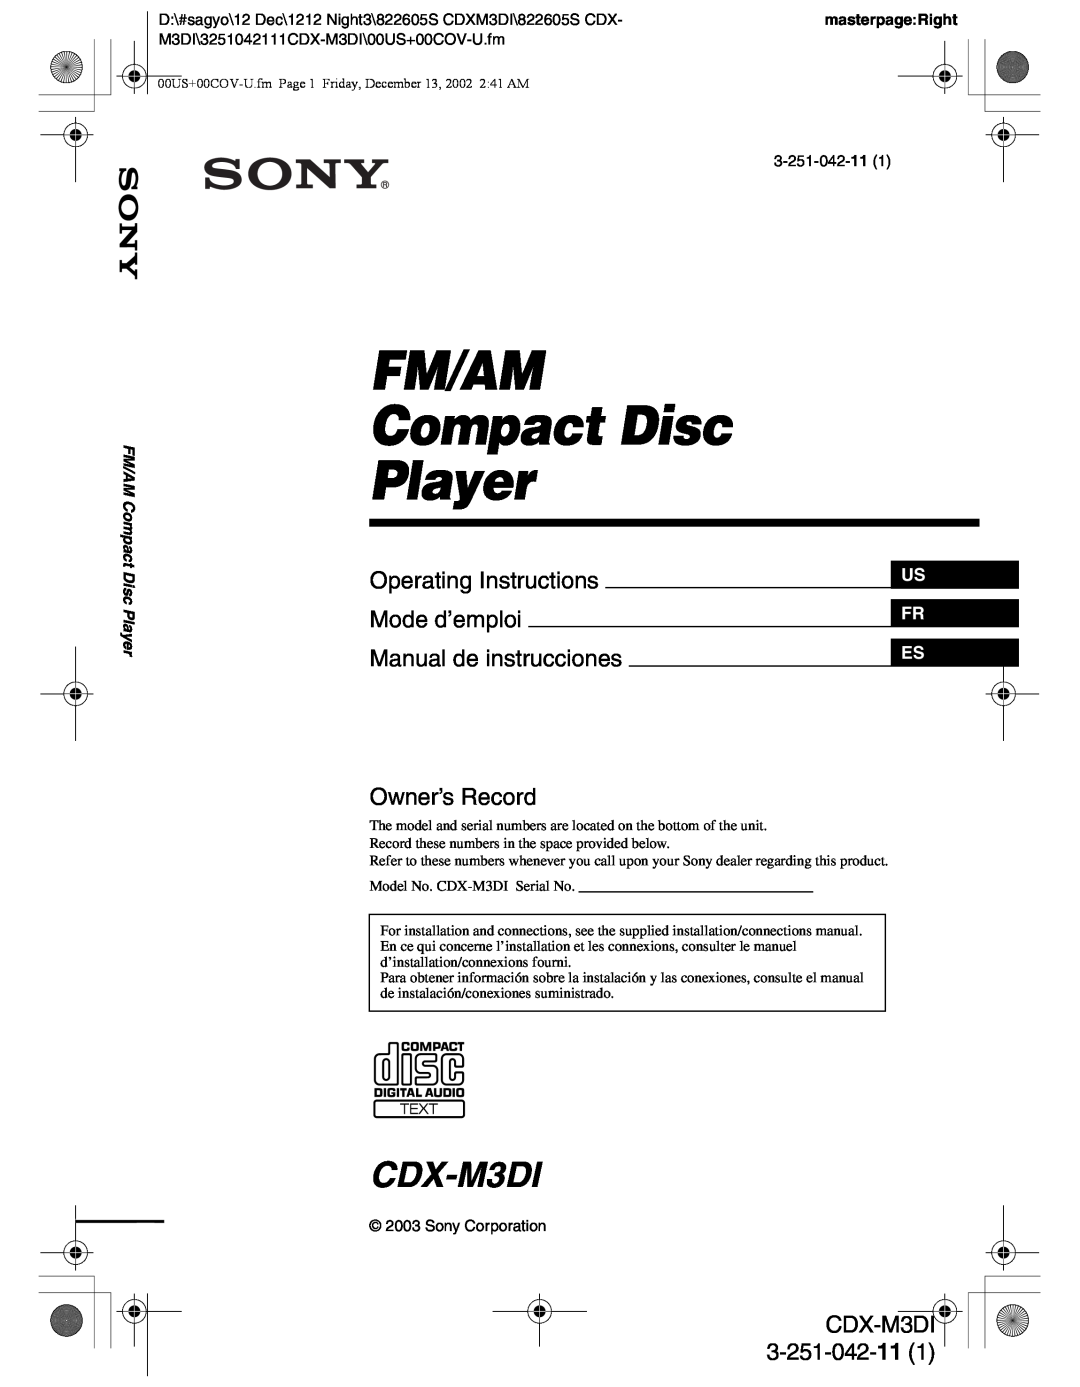 Sony CDX-M3DI operating instructions Owner’s Record, FM/AM Compact Disc Player, Operating Instructions, Mode d’emploi 